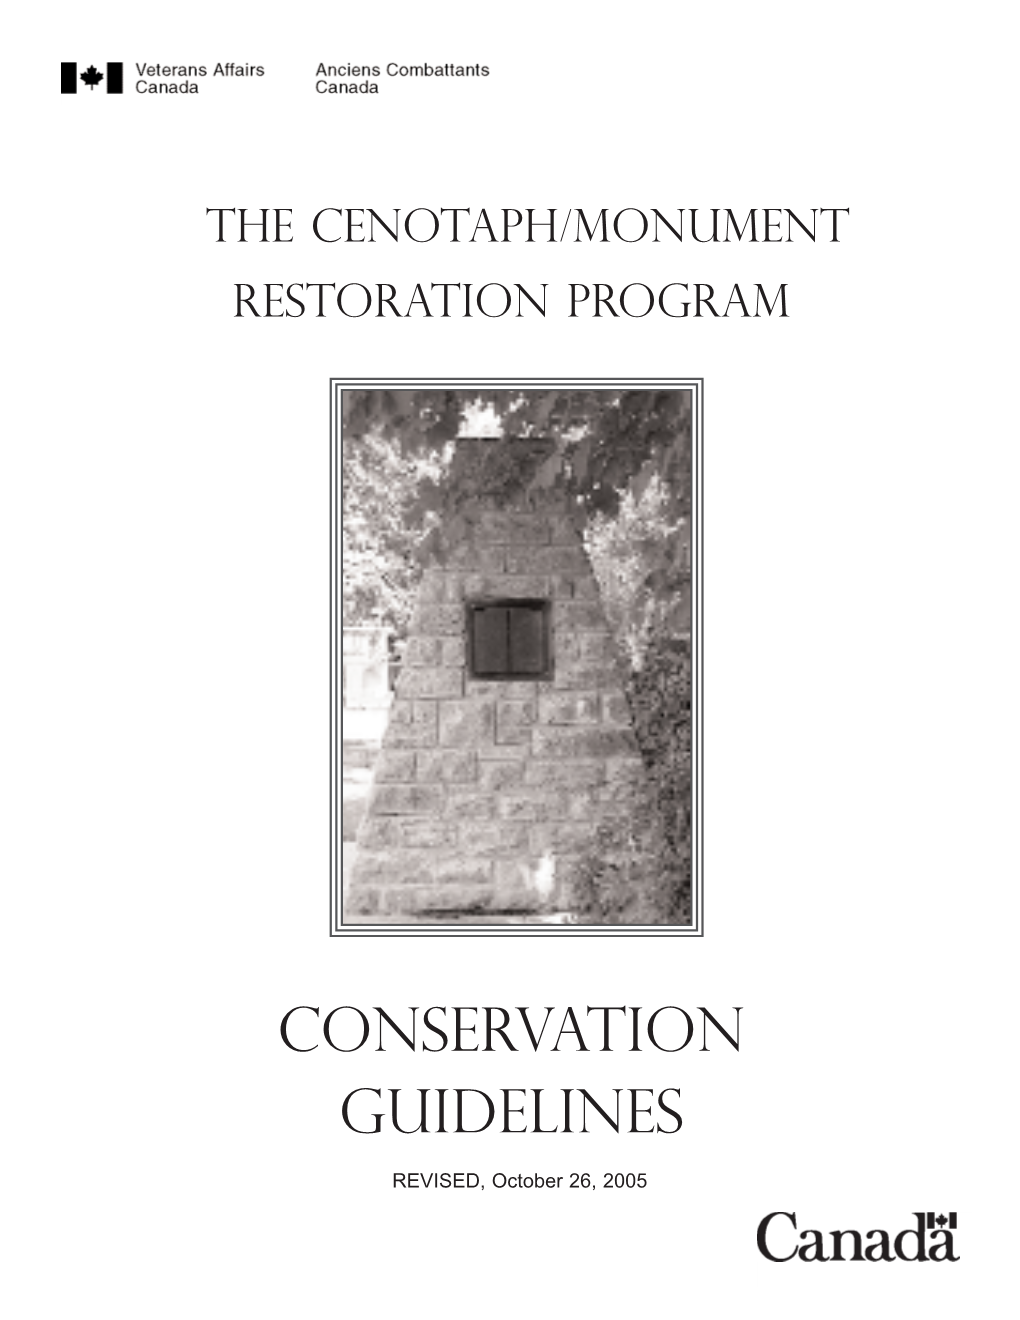 Conservation Guidelines